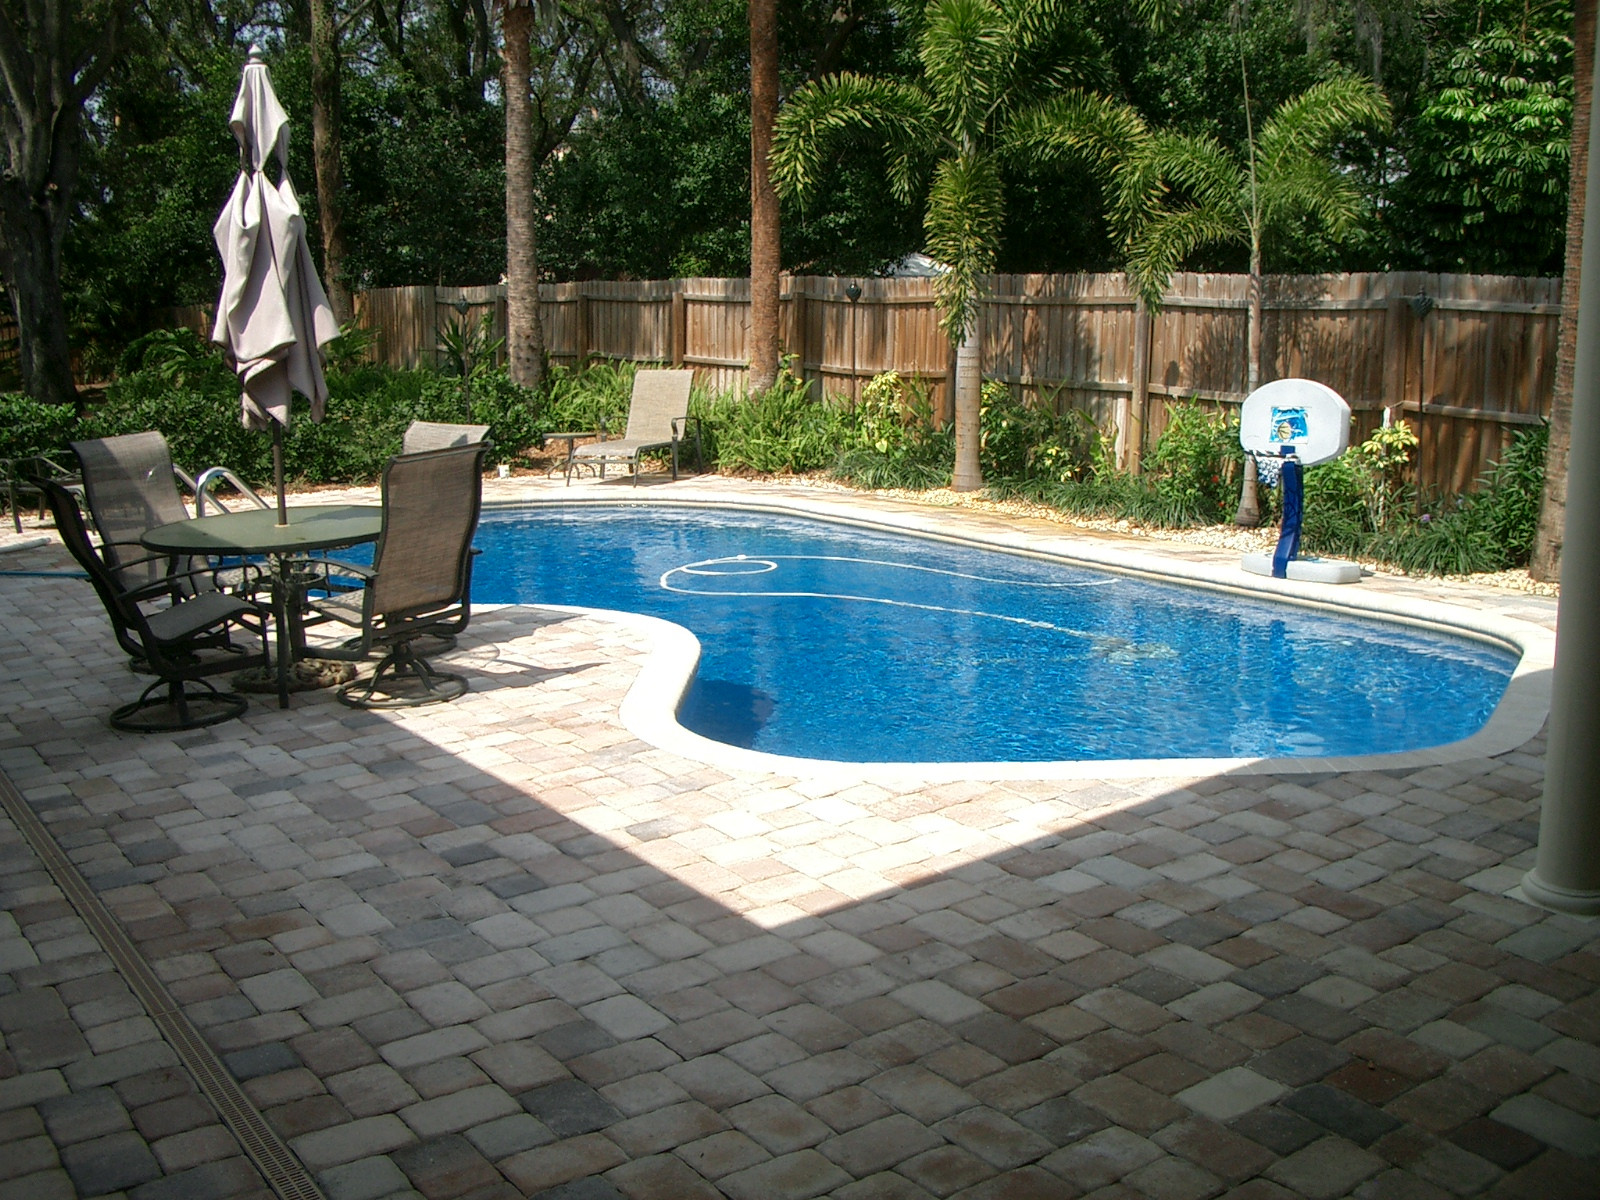 Pool Landscapes Designs
 Backyard Landscaping Ideas Swimming Pool Design